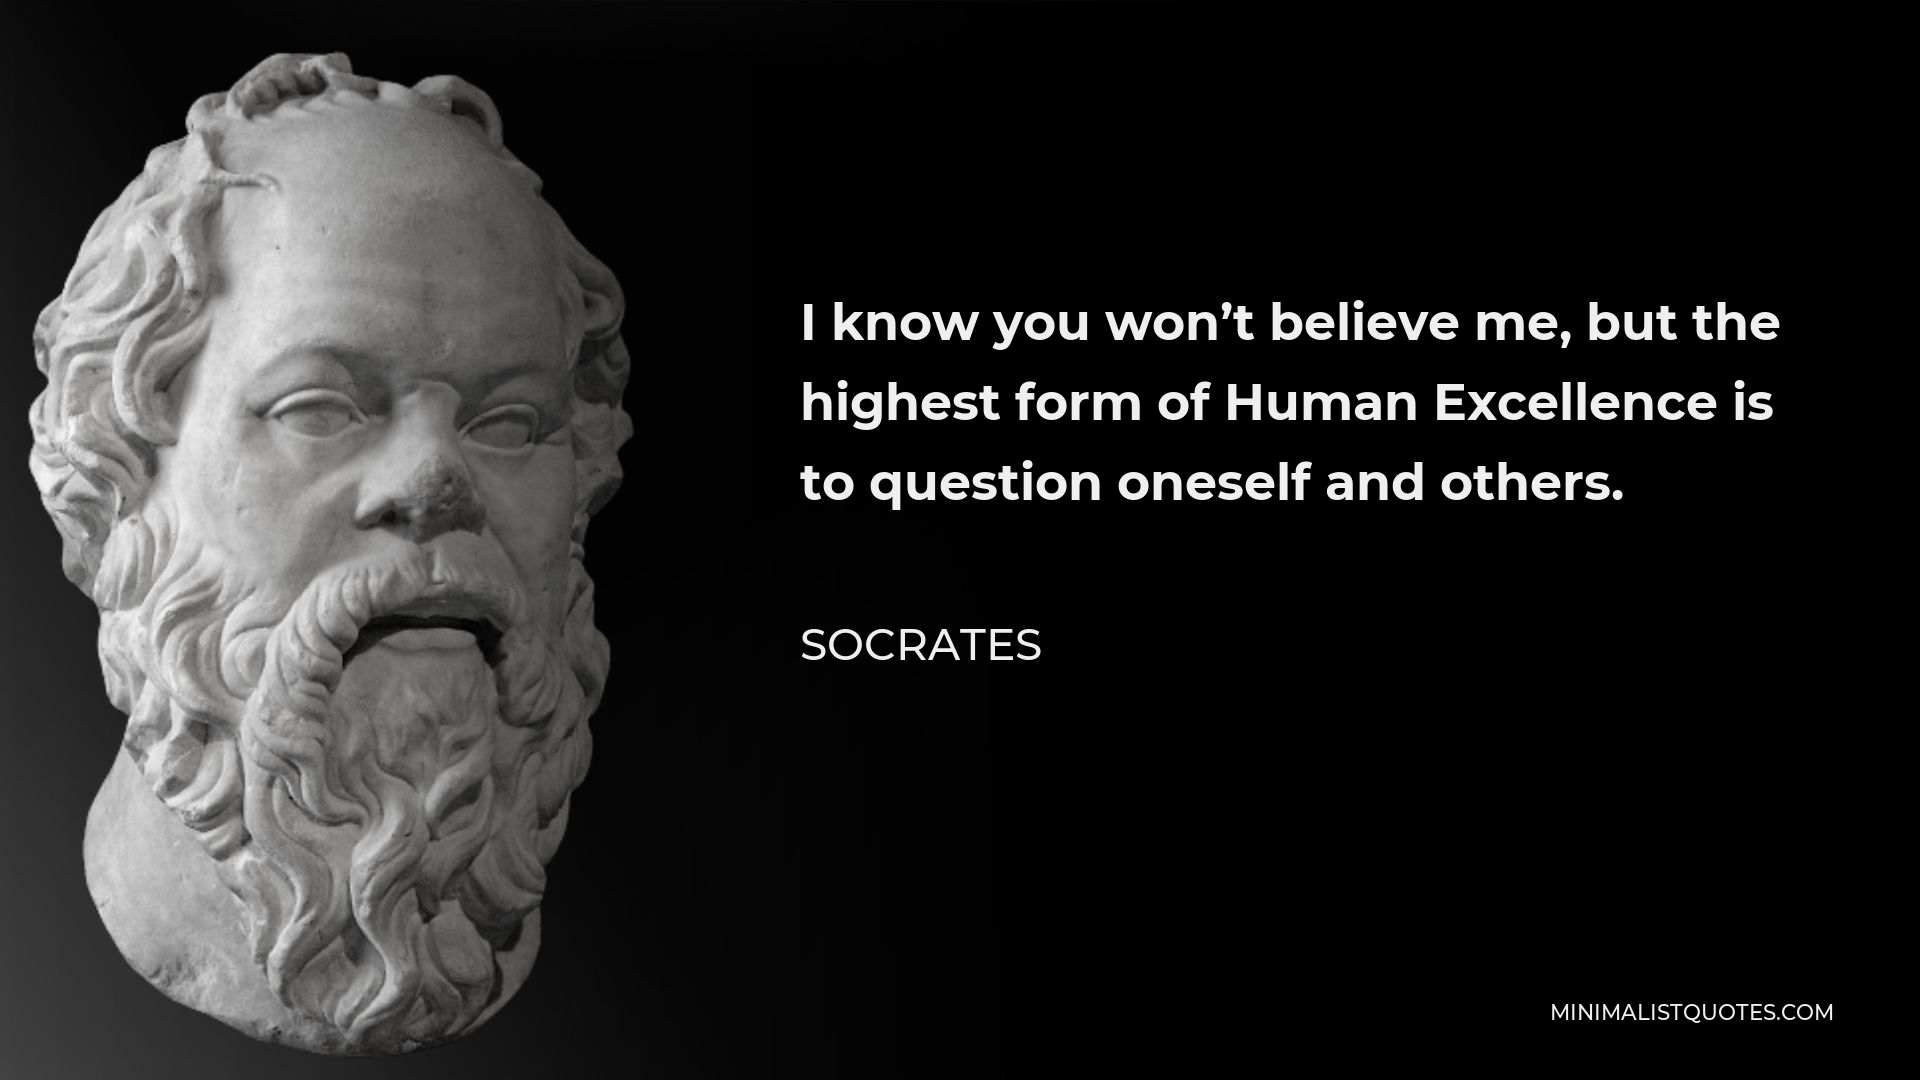 Socrates Quote - I know you won’t believe me, but the highest form of Human Excellence is to question oneself and others.